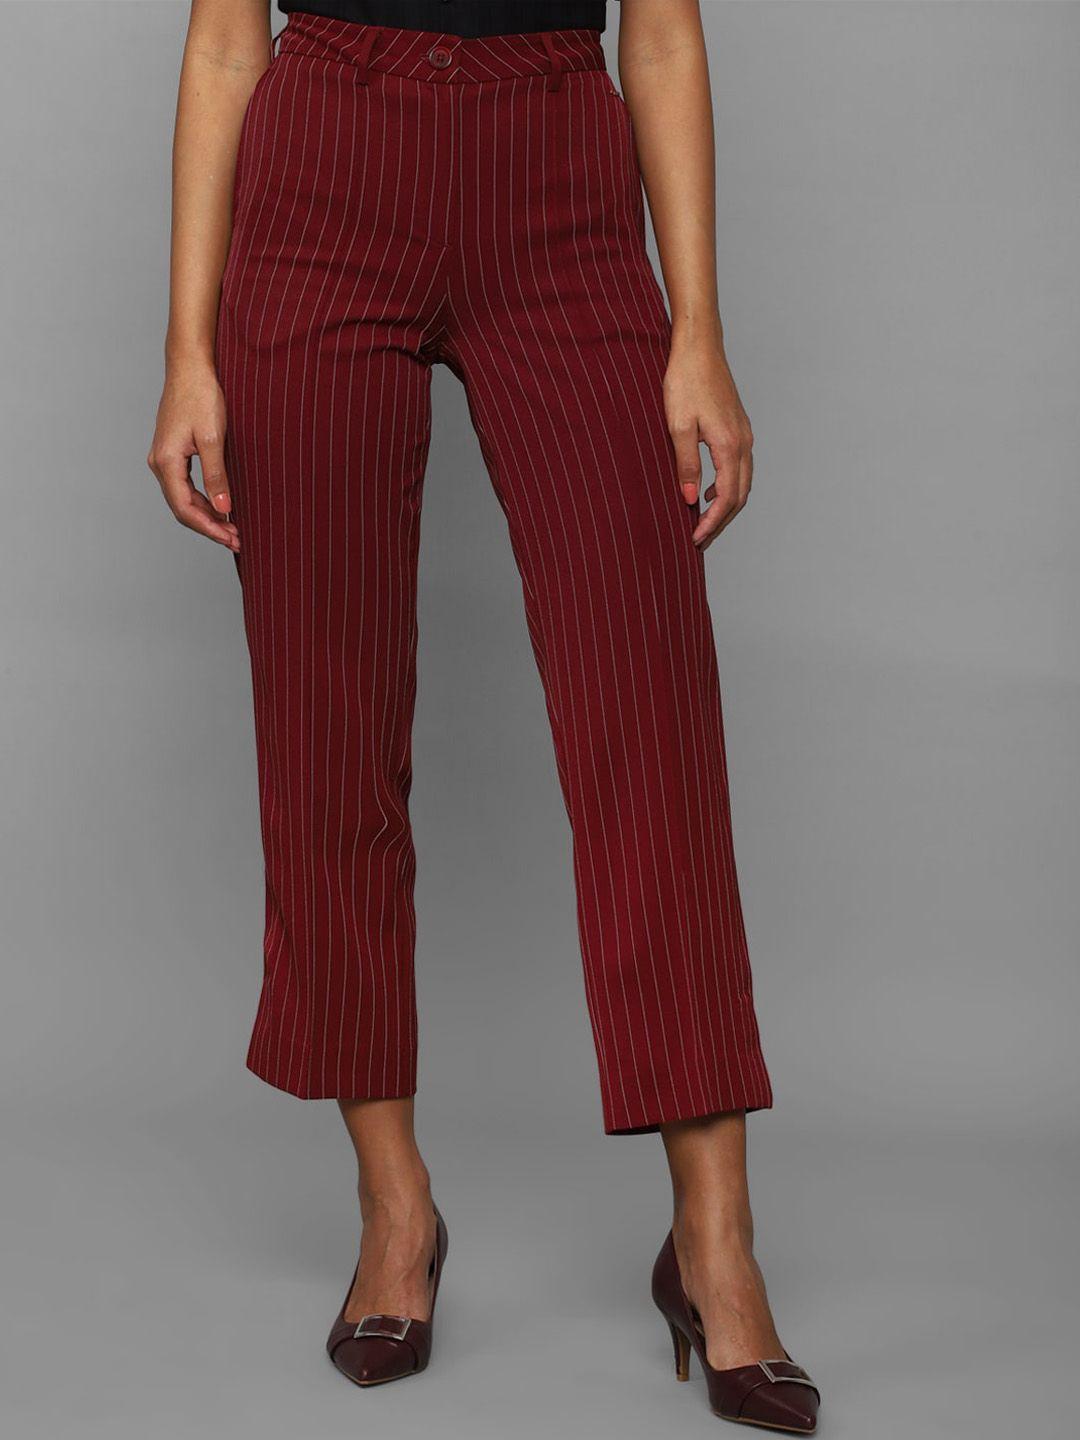 allen solly woman striped printed regular fit trousers